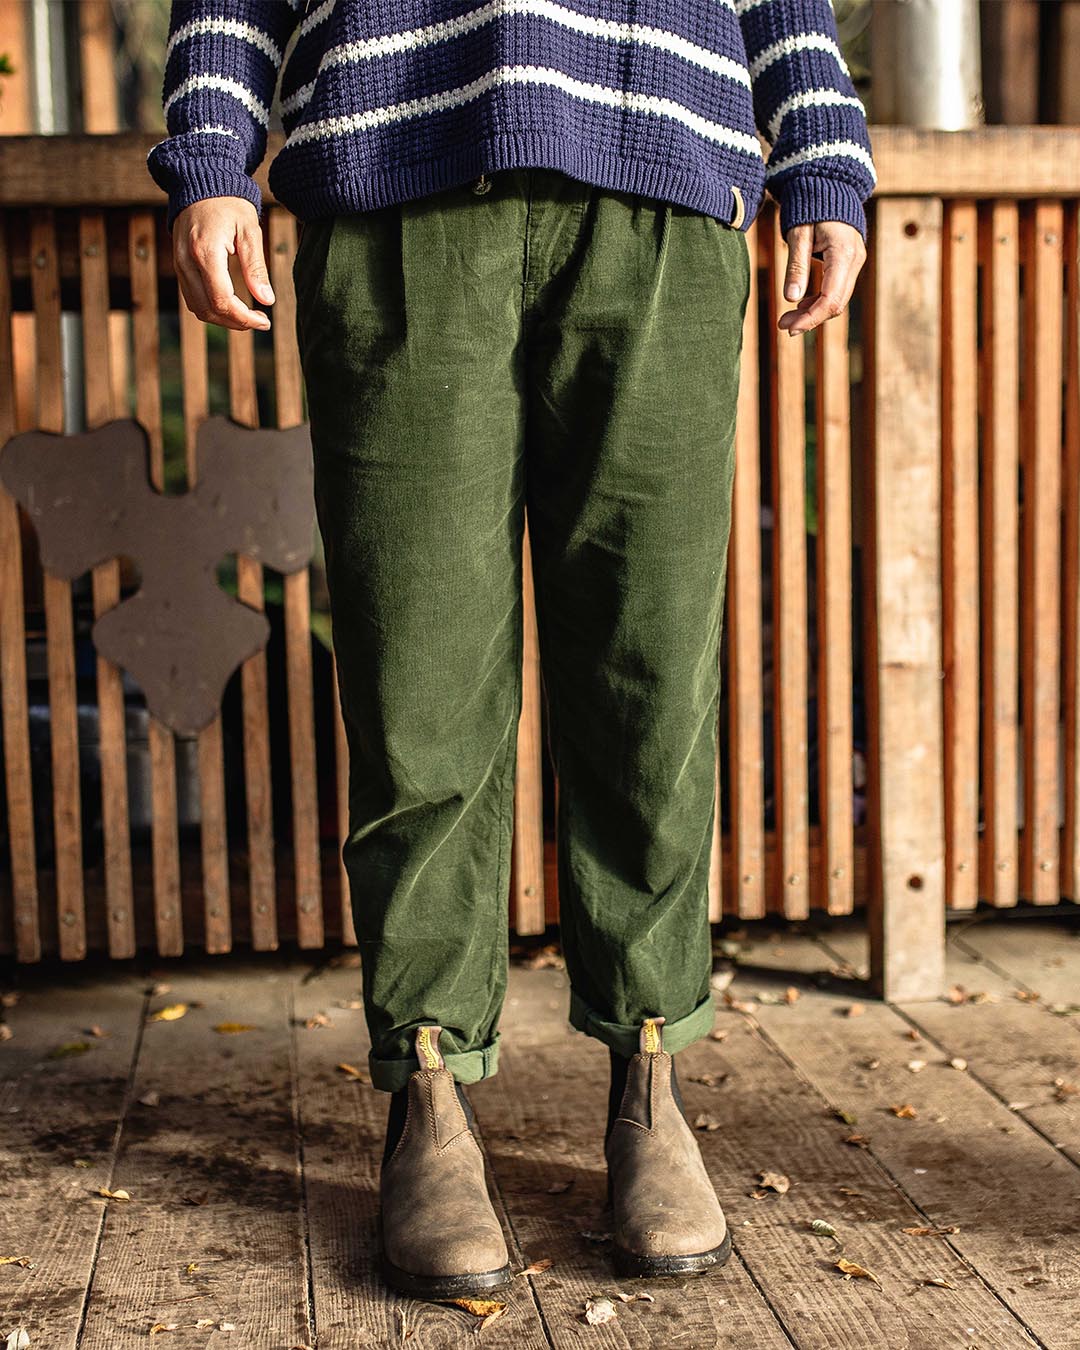 The Best Corduroy Pants Are Soft Yet Stylish